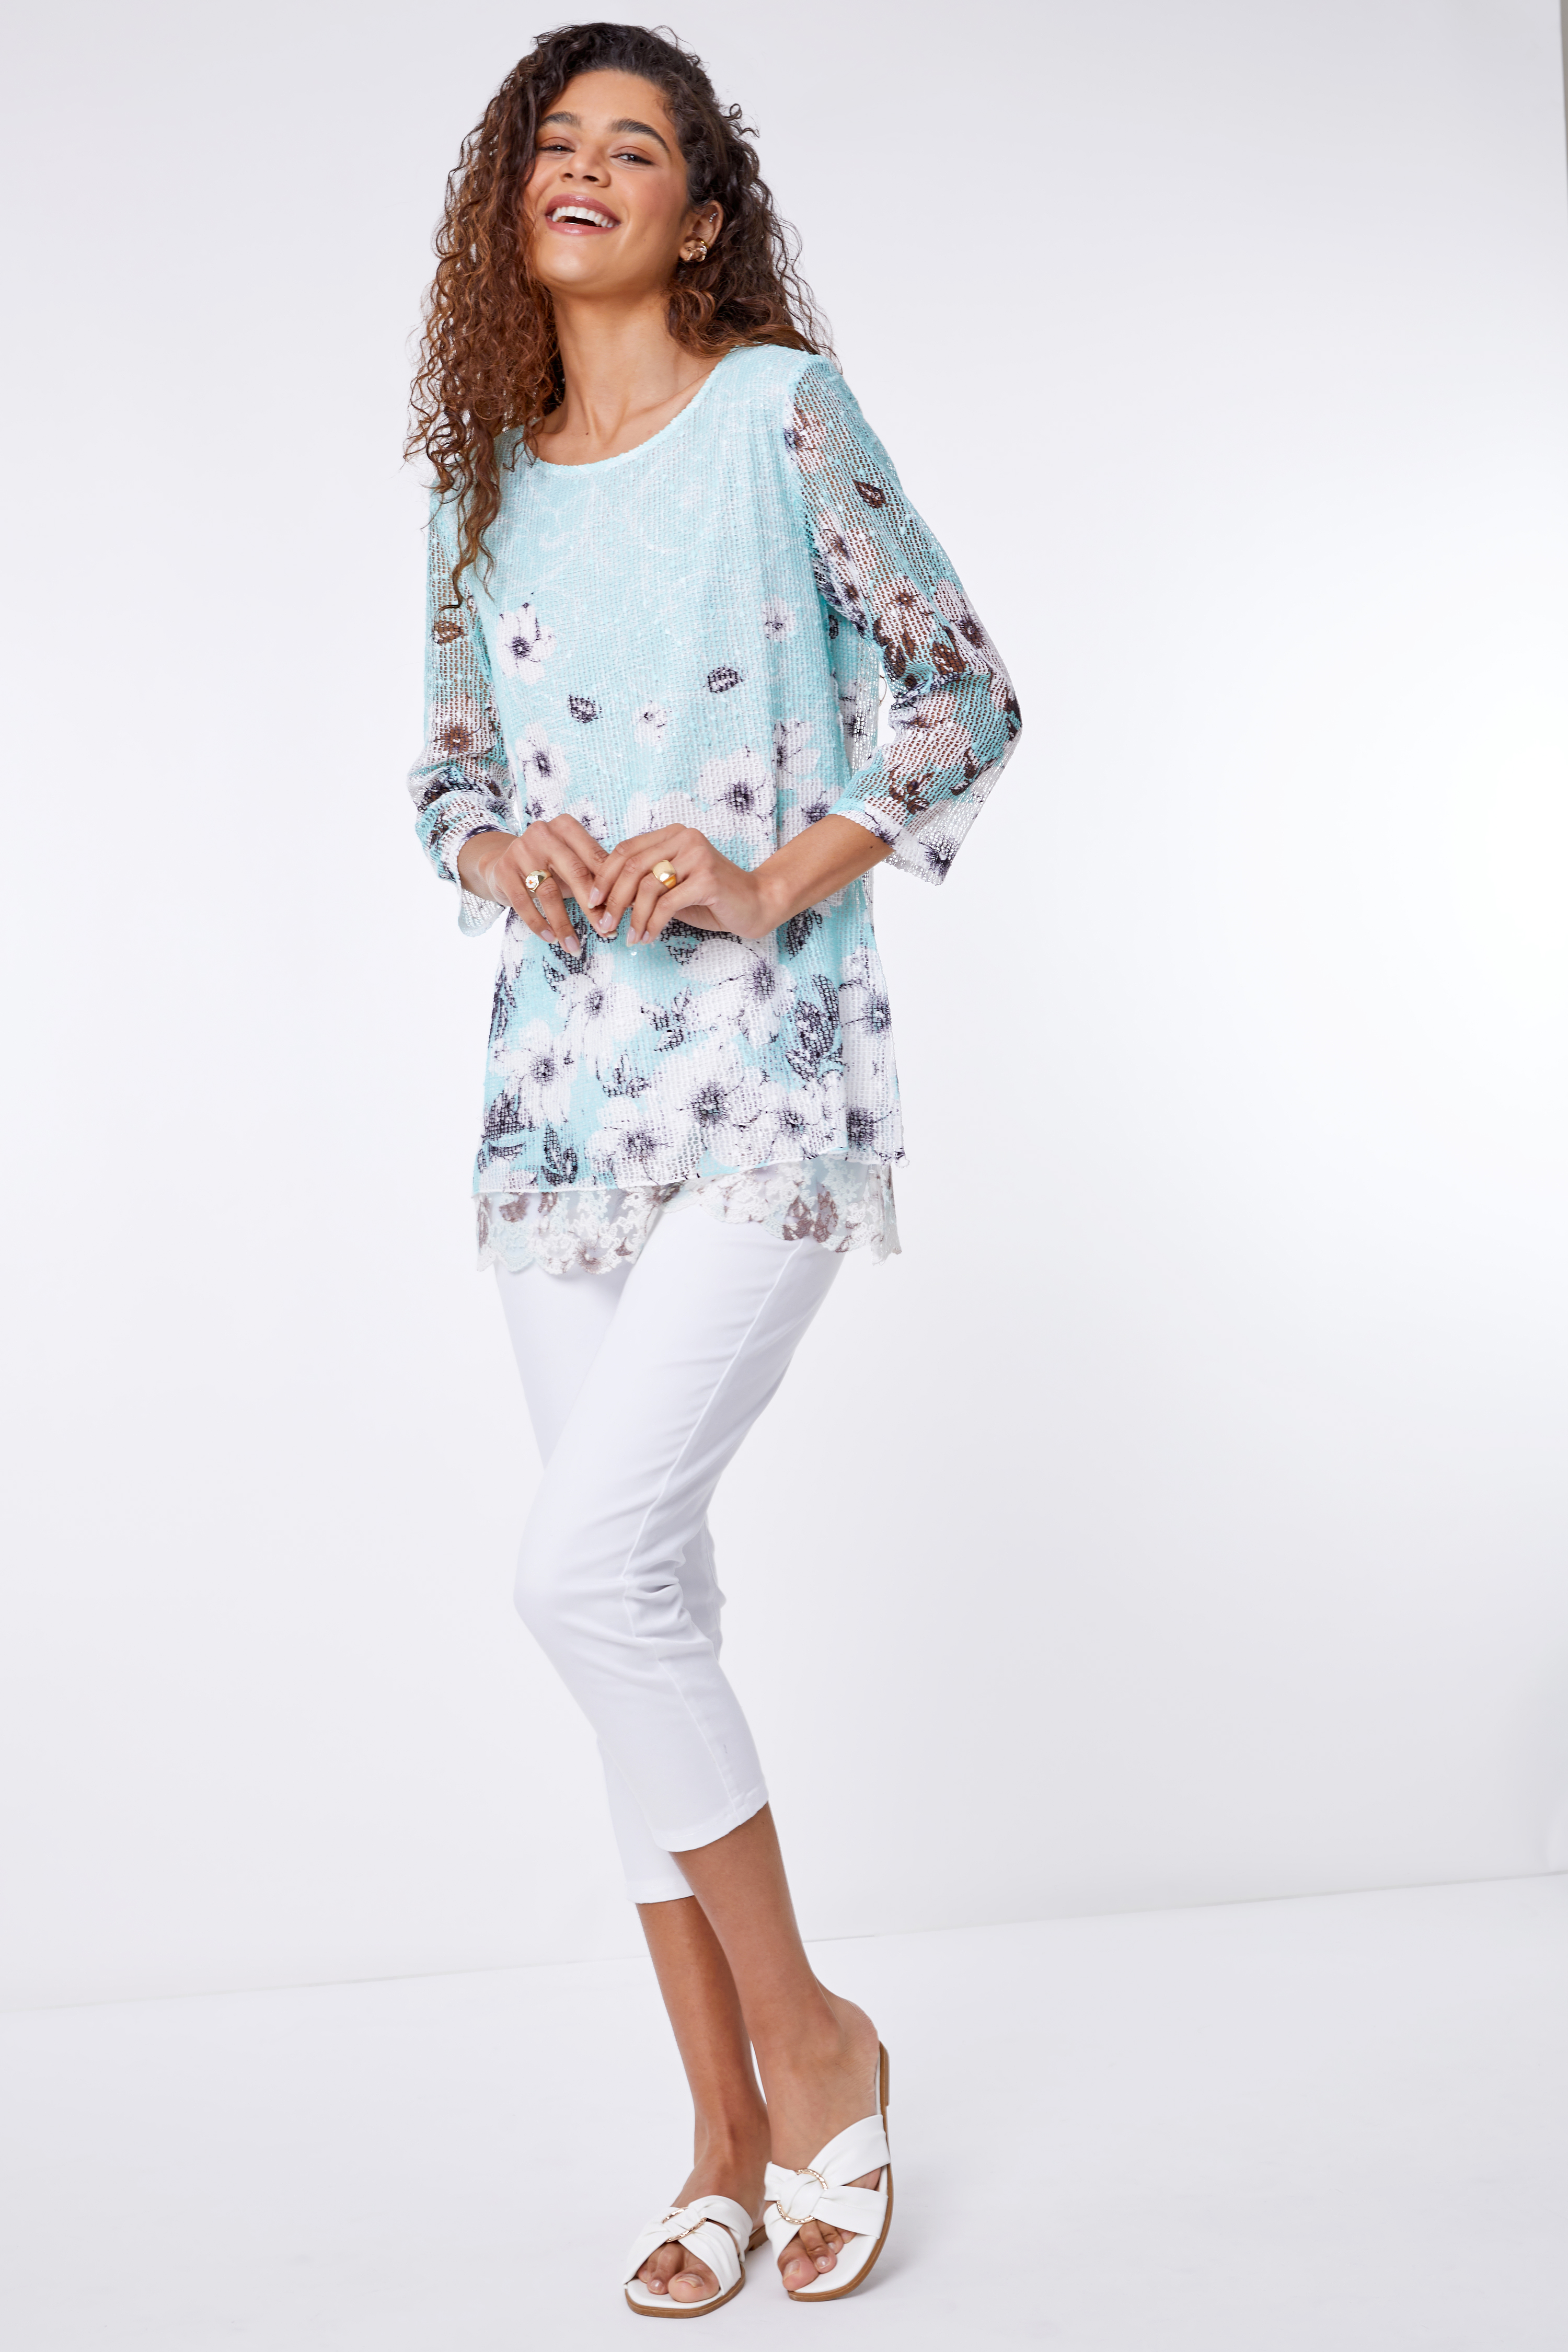 Mint Lace Trim Overlay Floral Print Top, Image 2 of 5